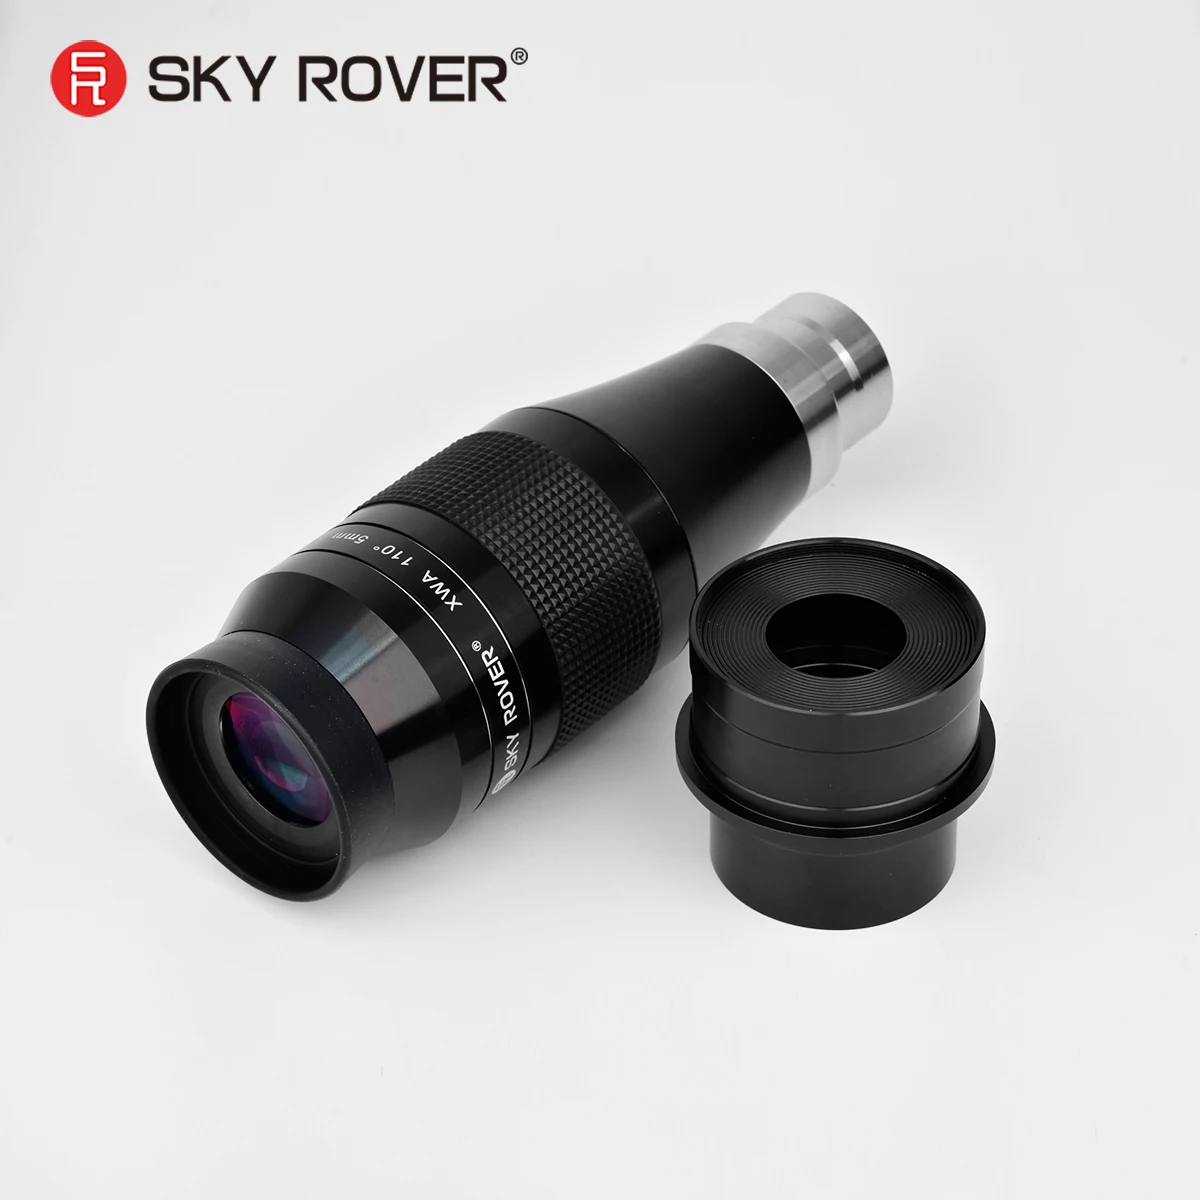 

SKY ROVER 110 degree XWA 5mm ultra wide angle eyepiece accessory provides standard 1.25 inch and 2-inch interfaces